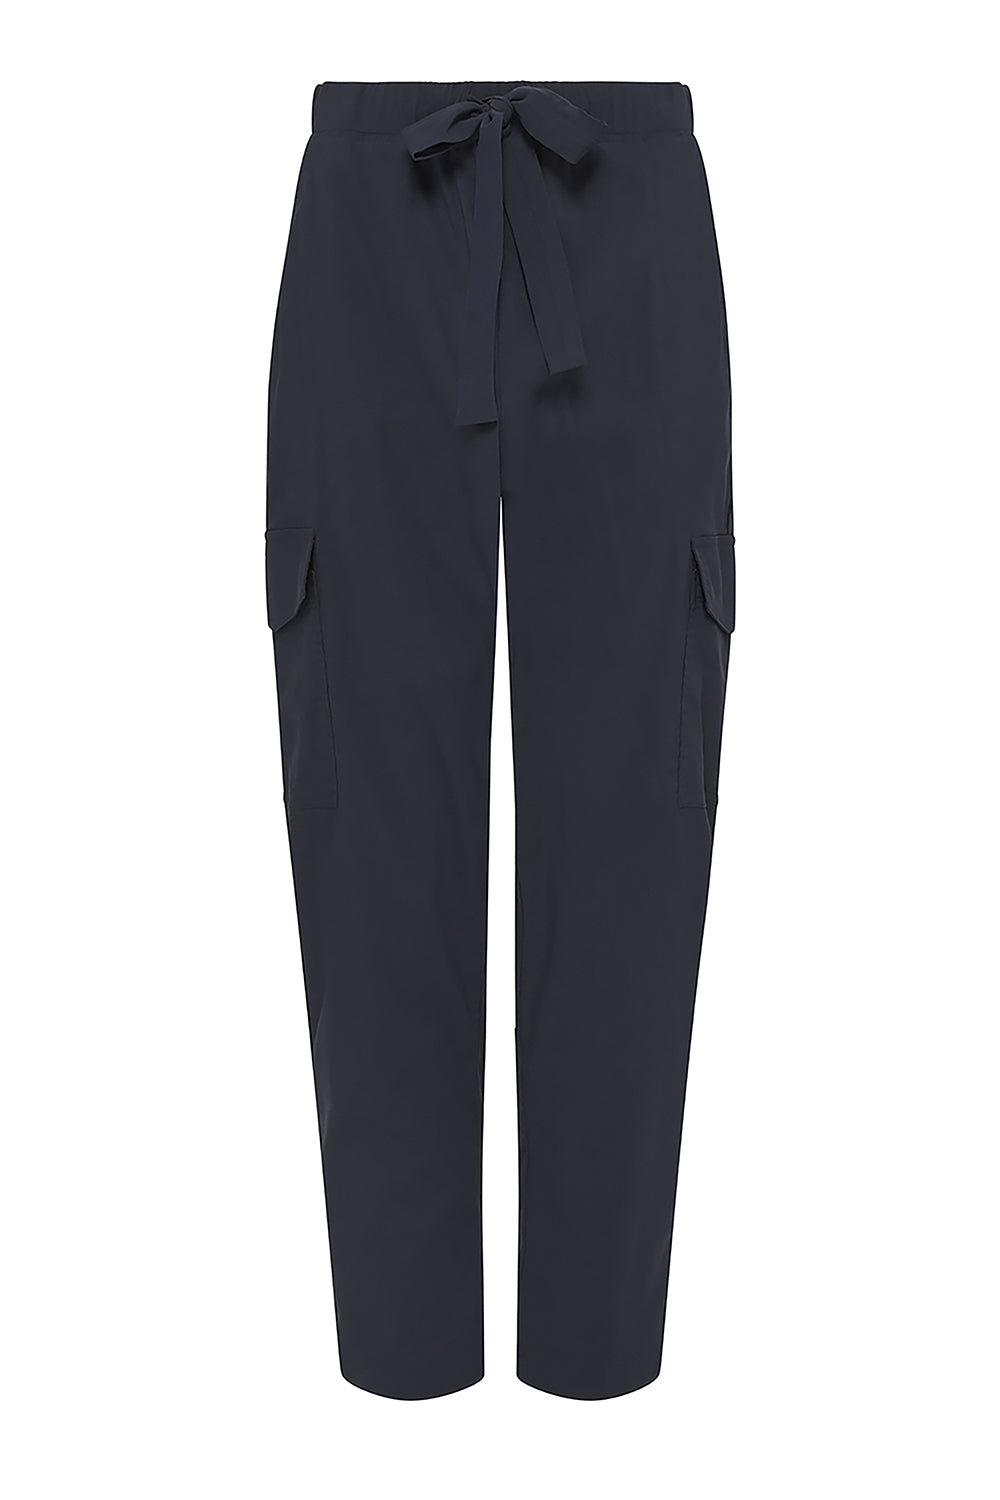 Acrobat Soft Cargo Pant - French Ink - Pant VERGE